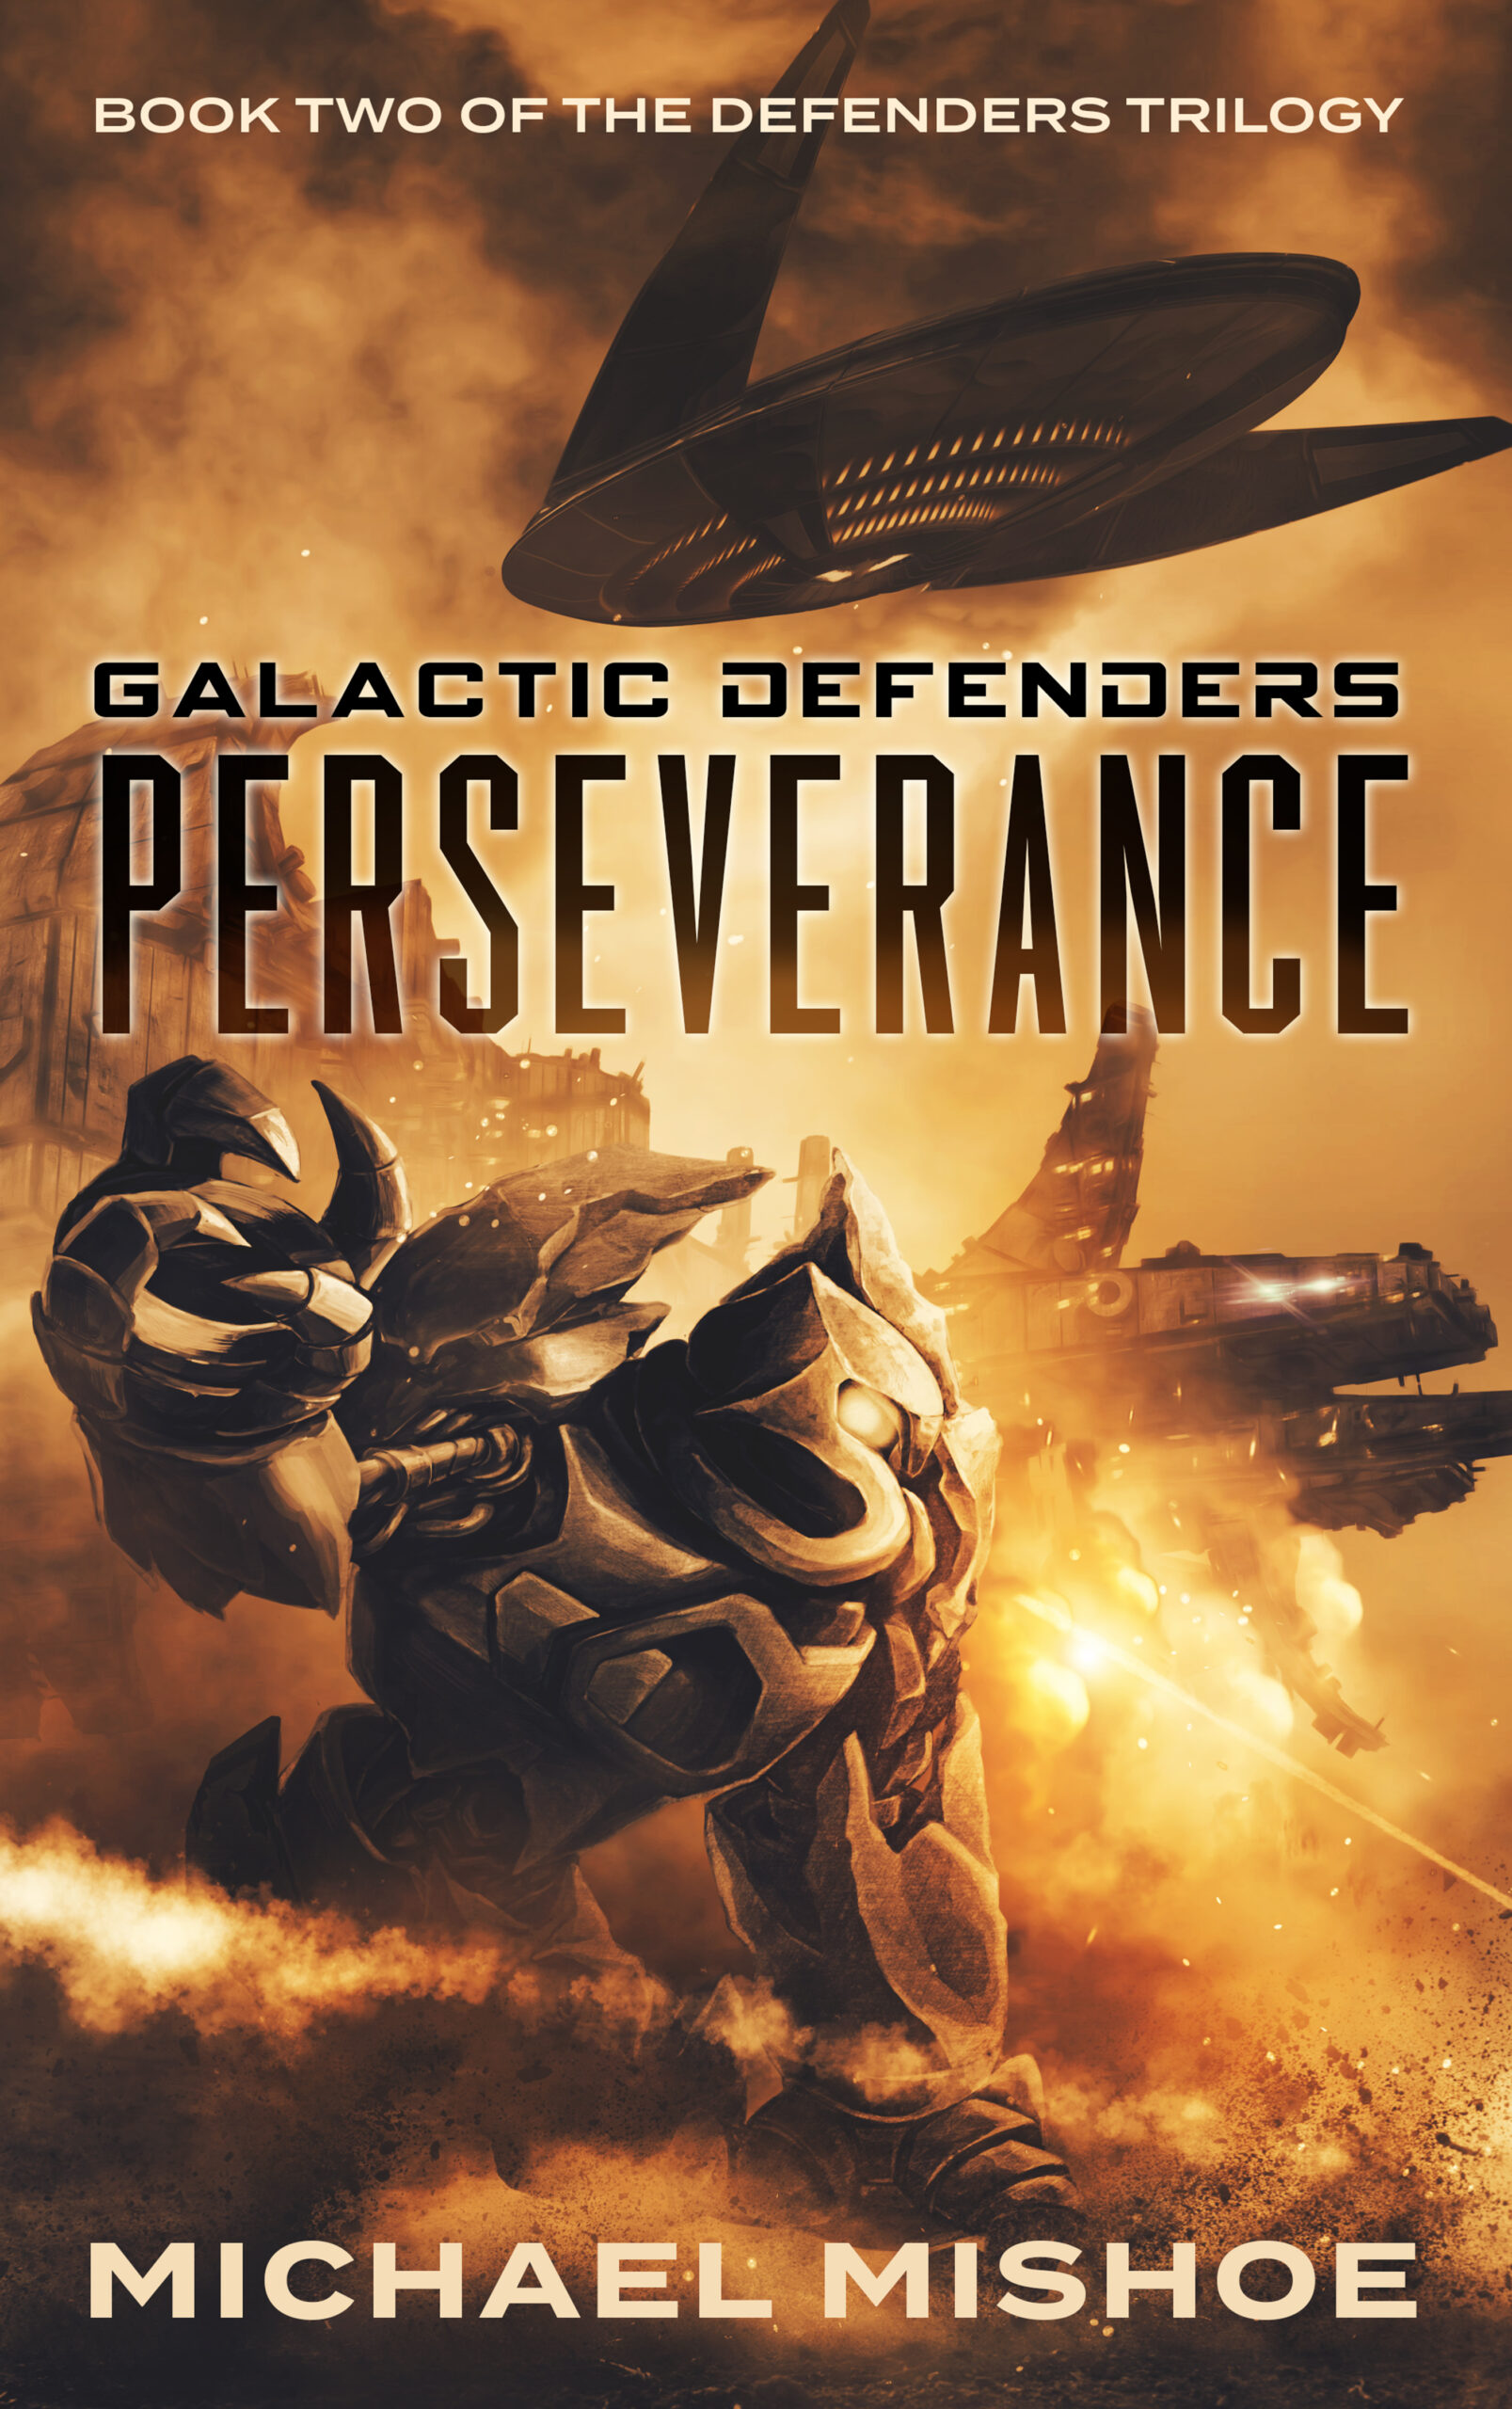 FREE: Perseverance by Michael Mishoe